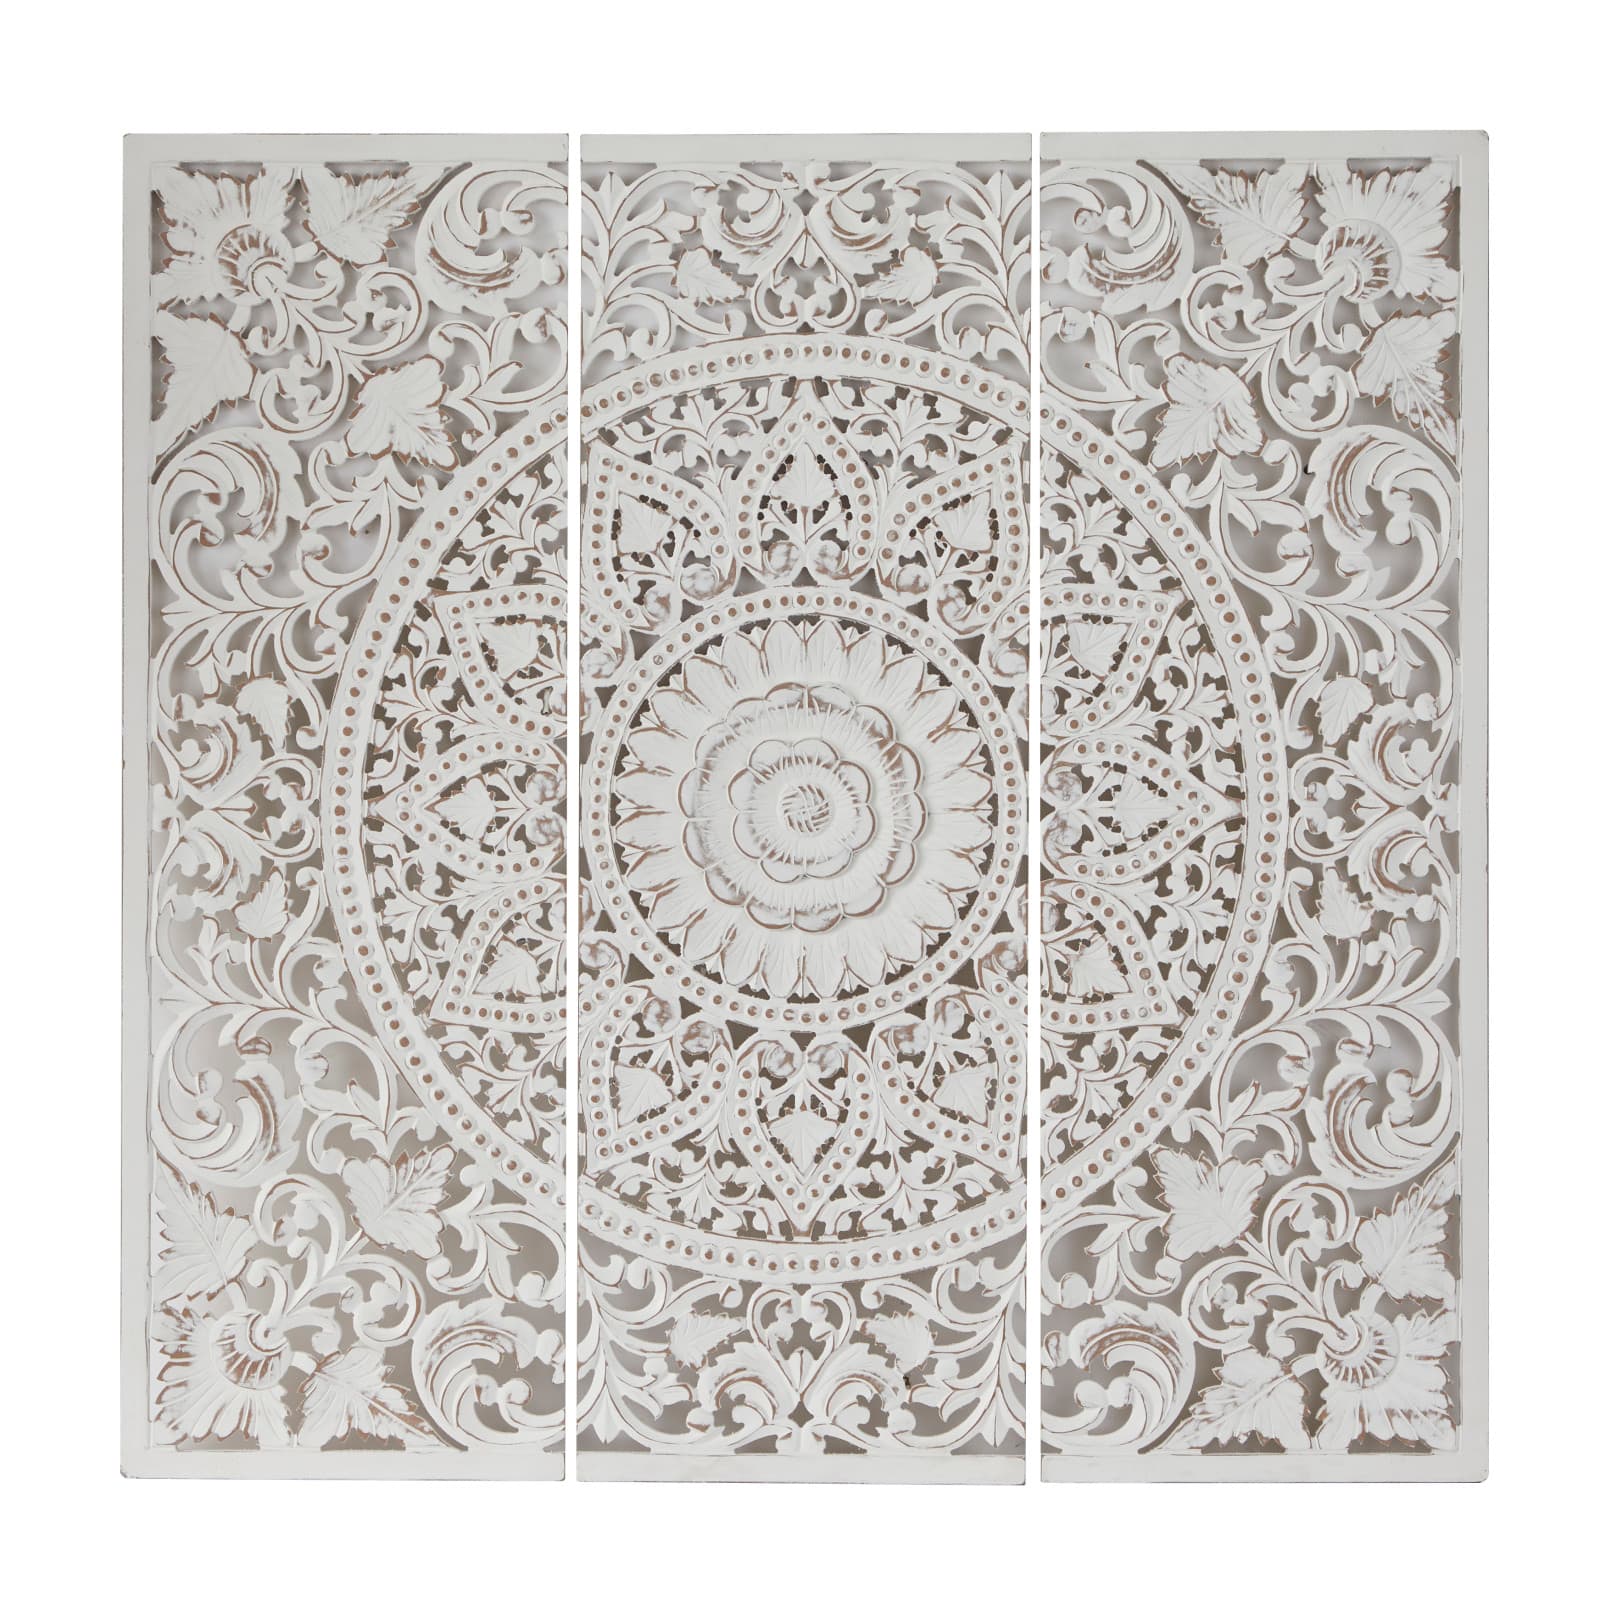 Wood Floral Handmade Intricately Carved Wall Decor With Mandala Design  White - Olivia & May : Target